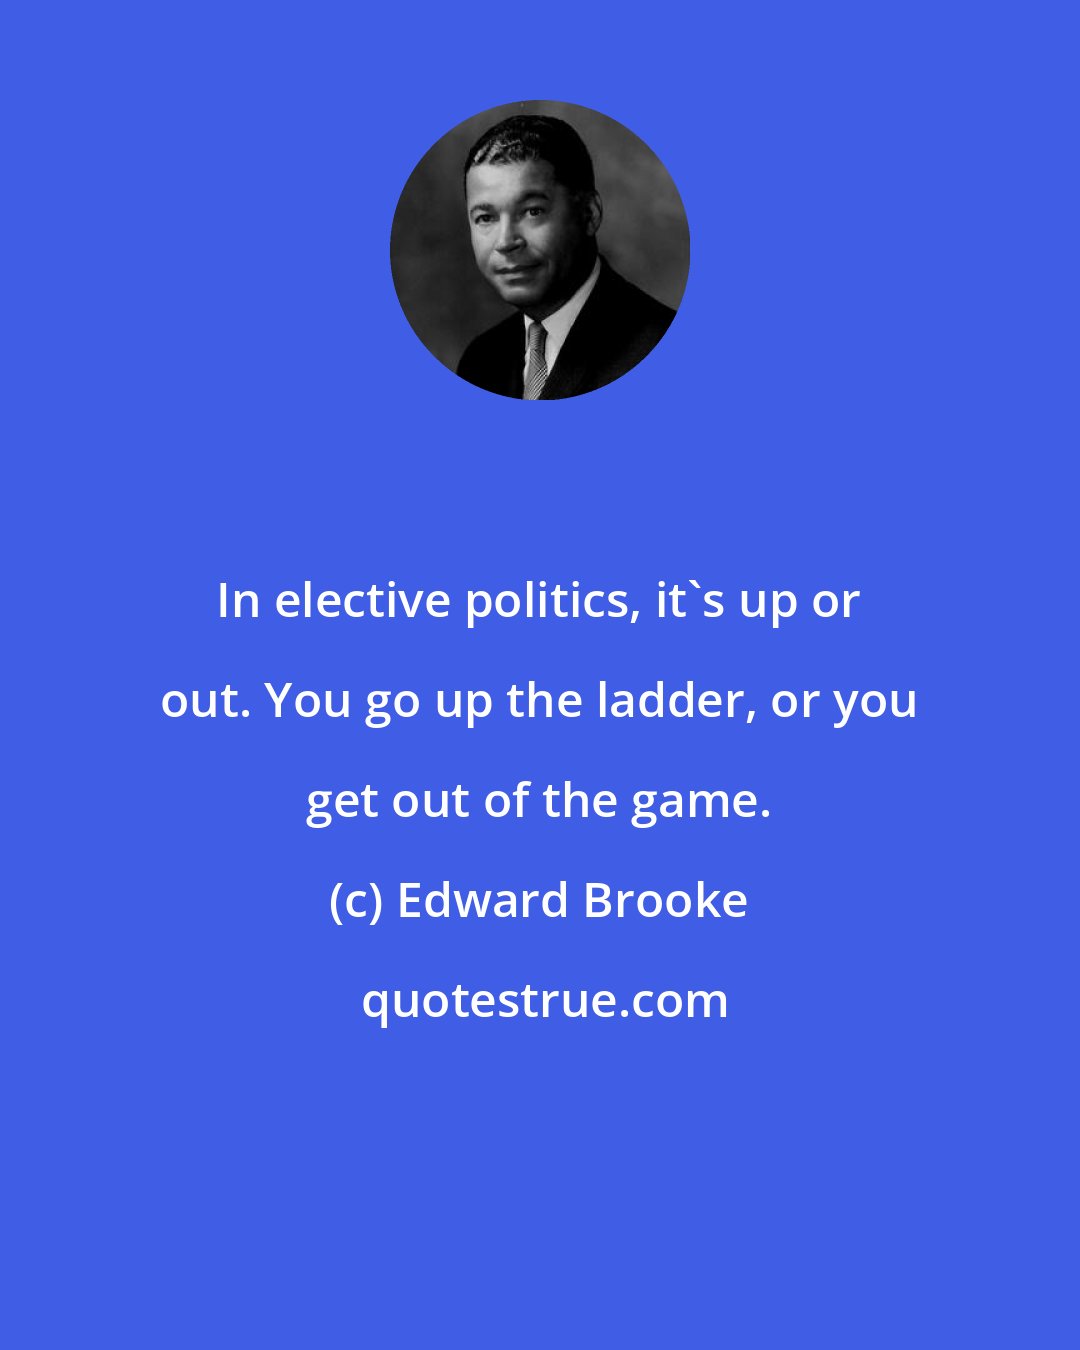 Edward Brooke: In elective politics, it's up or out. You go up the ladder, or you get out of the game.